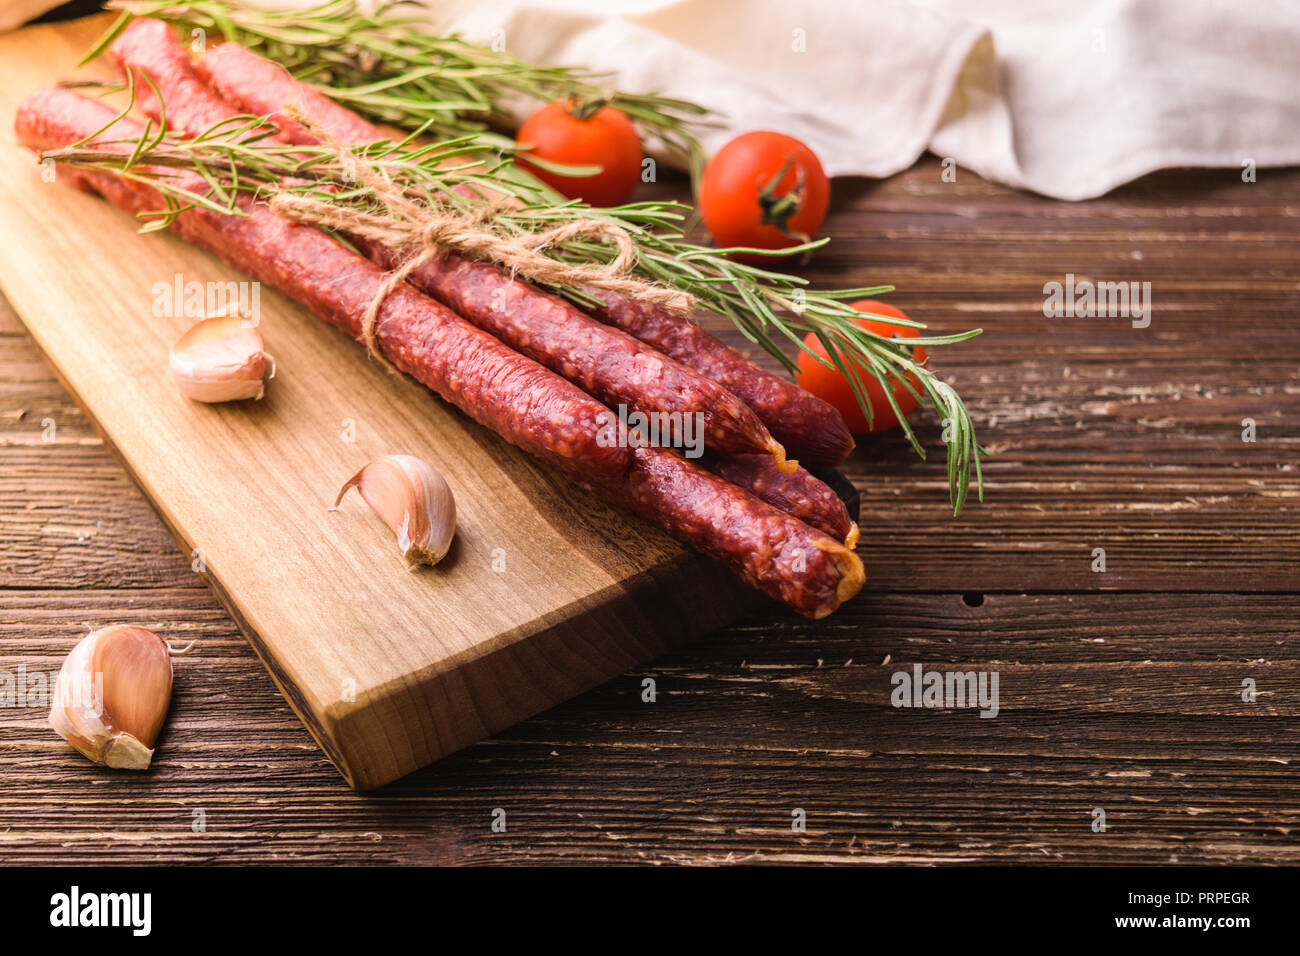 Kabanosy - smoked traditional polish pork sausages on wooden cutting board. With rosemary herb, garlic cloves and tomatoes. On rustic wooden table Stock Photo